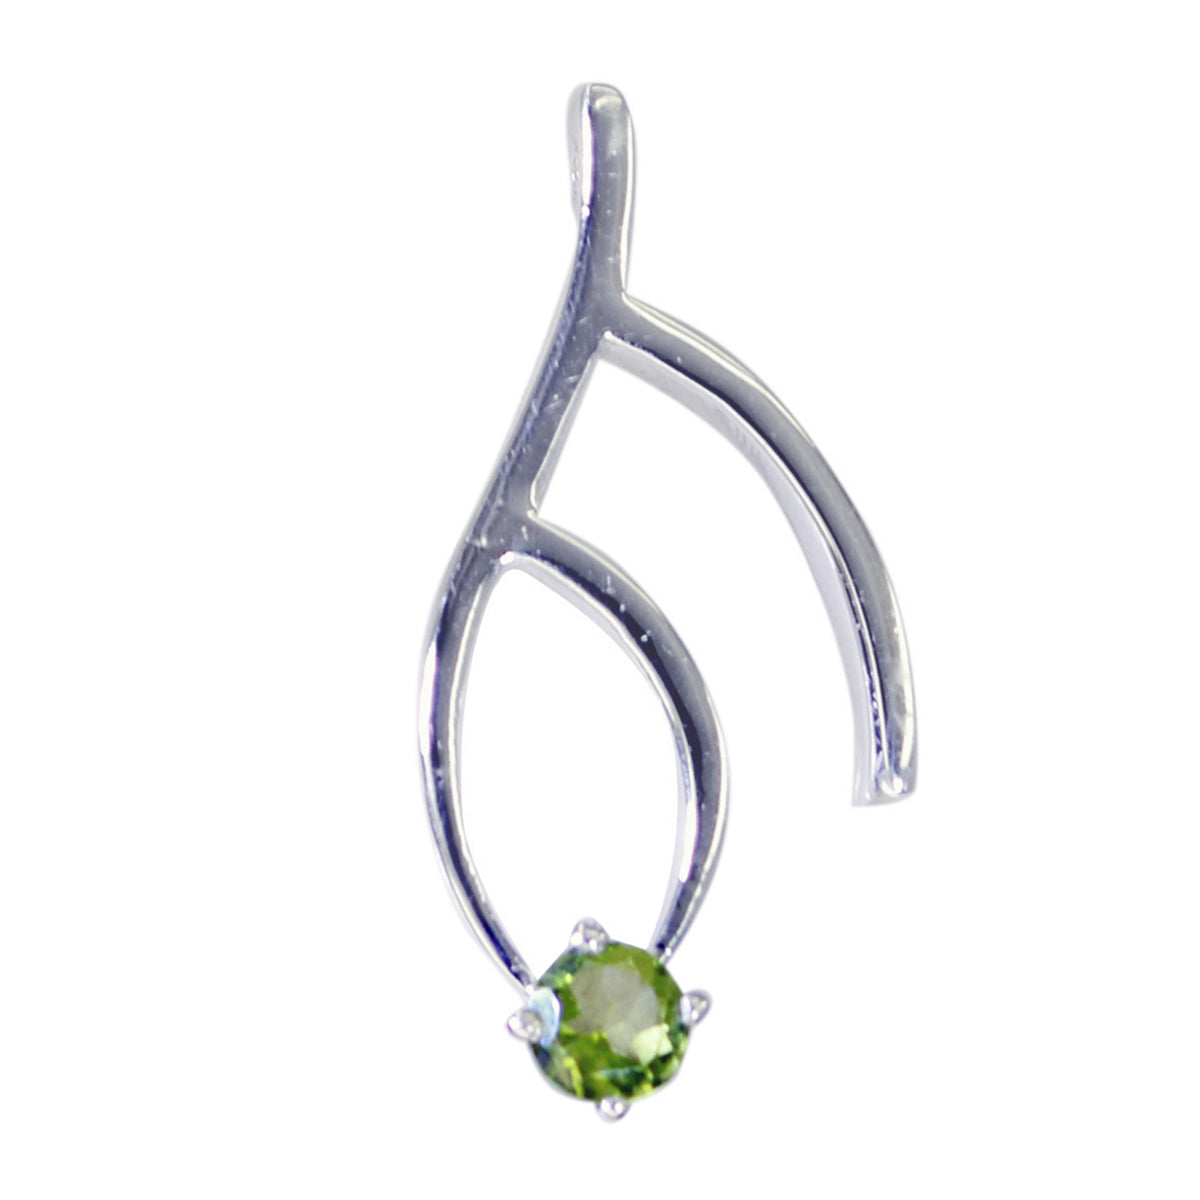 Riyo Engaging Gemstone Round Faceted Green Peridot Sterling Silver Pendant Gift For Friend